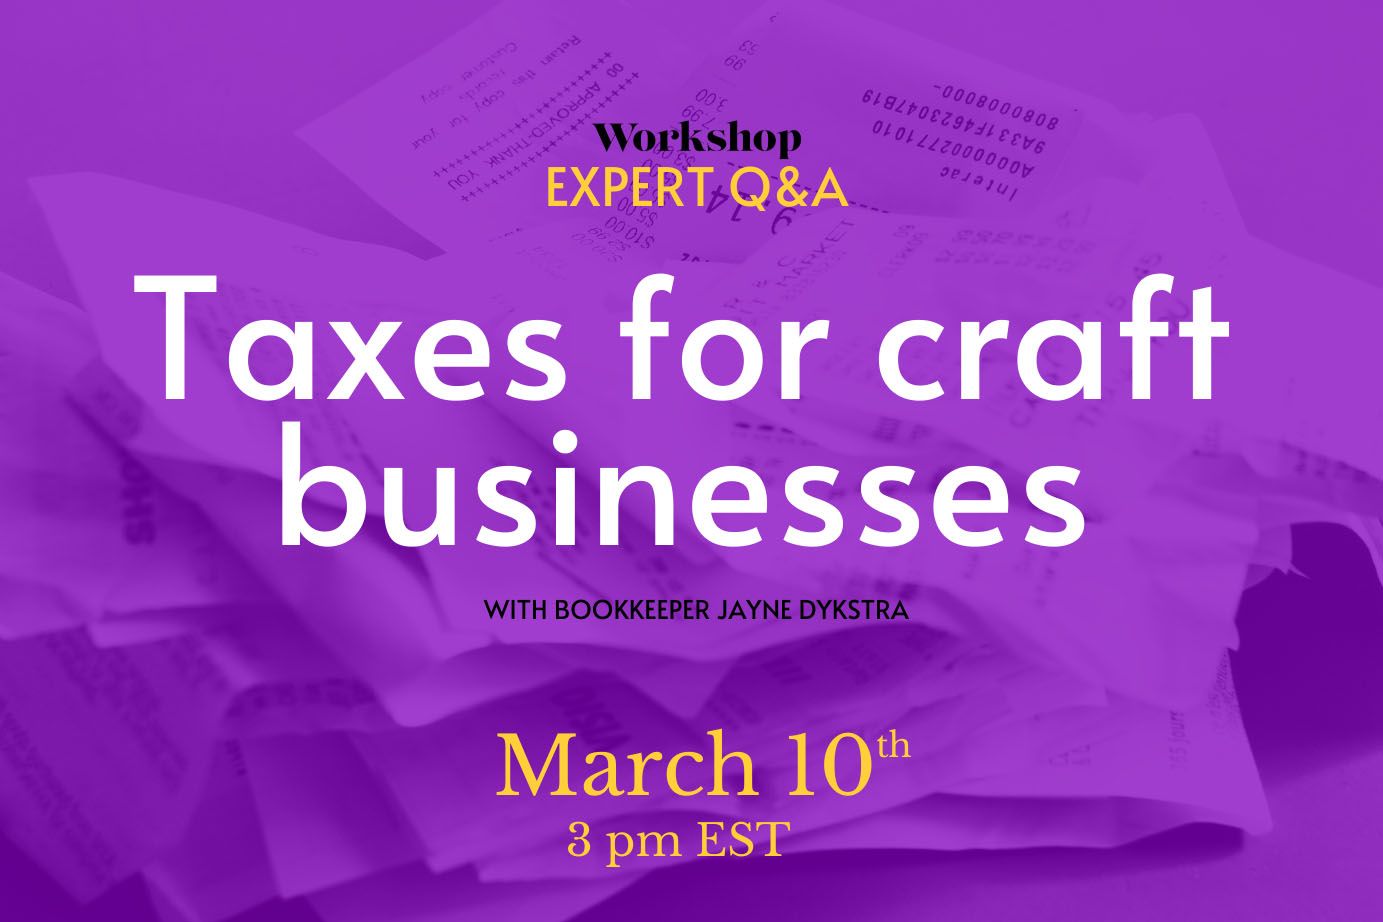 Text: "Expert Q&A: Taxes for craft businesses with bookkeeper Jayne Dykstra. March 10th, 3 pm EST"